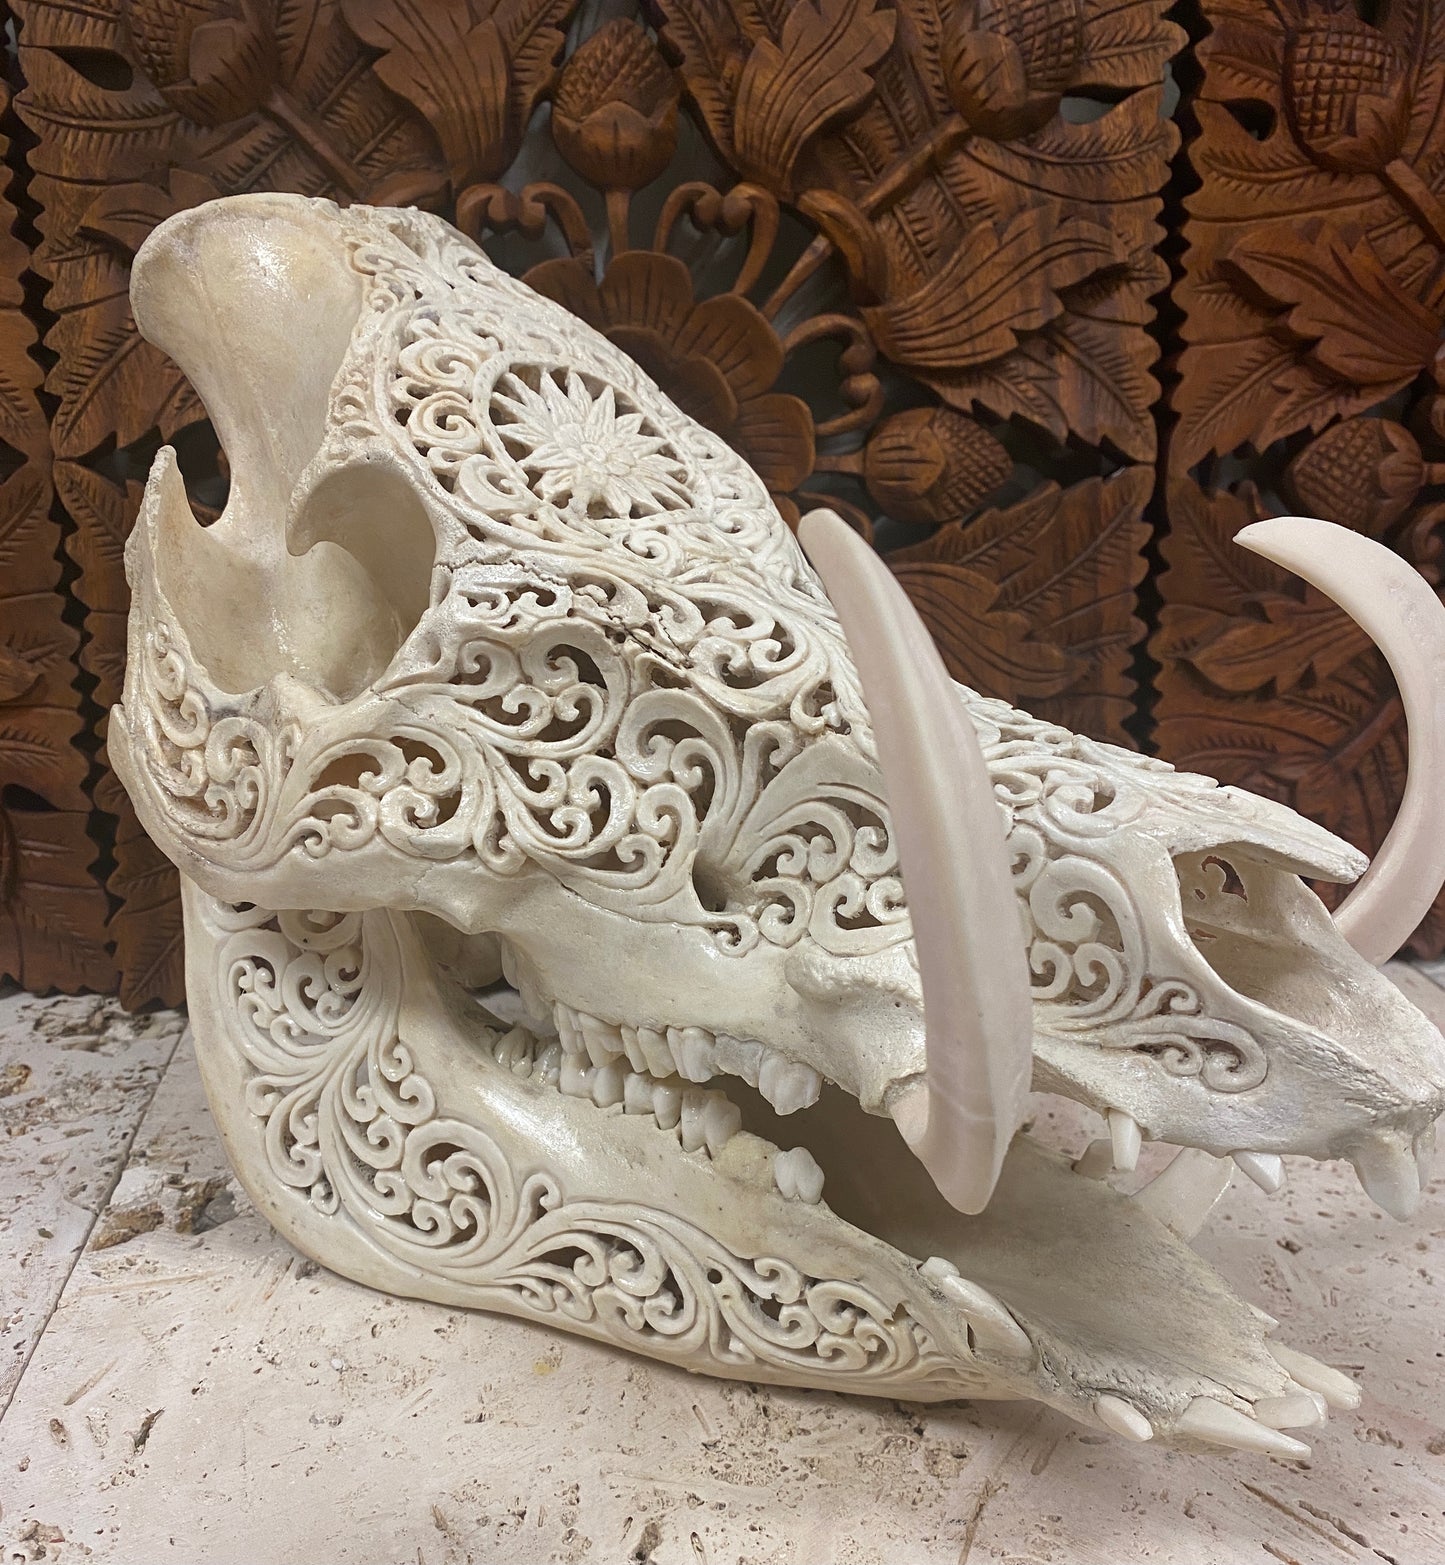 Intricately Carved Wild Boar Skulls with Mandala